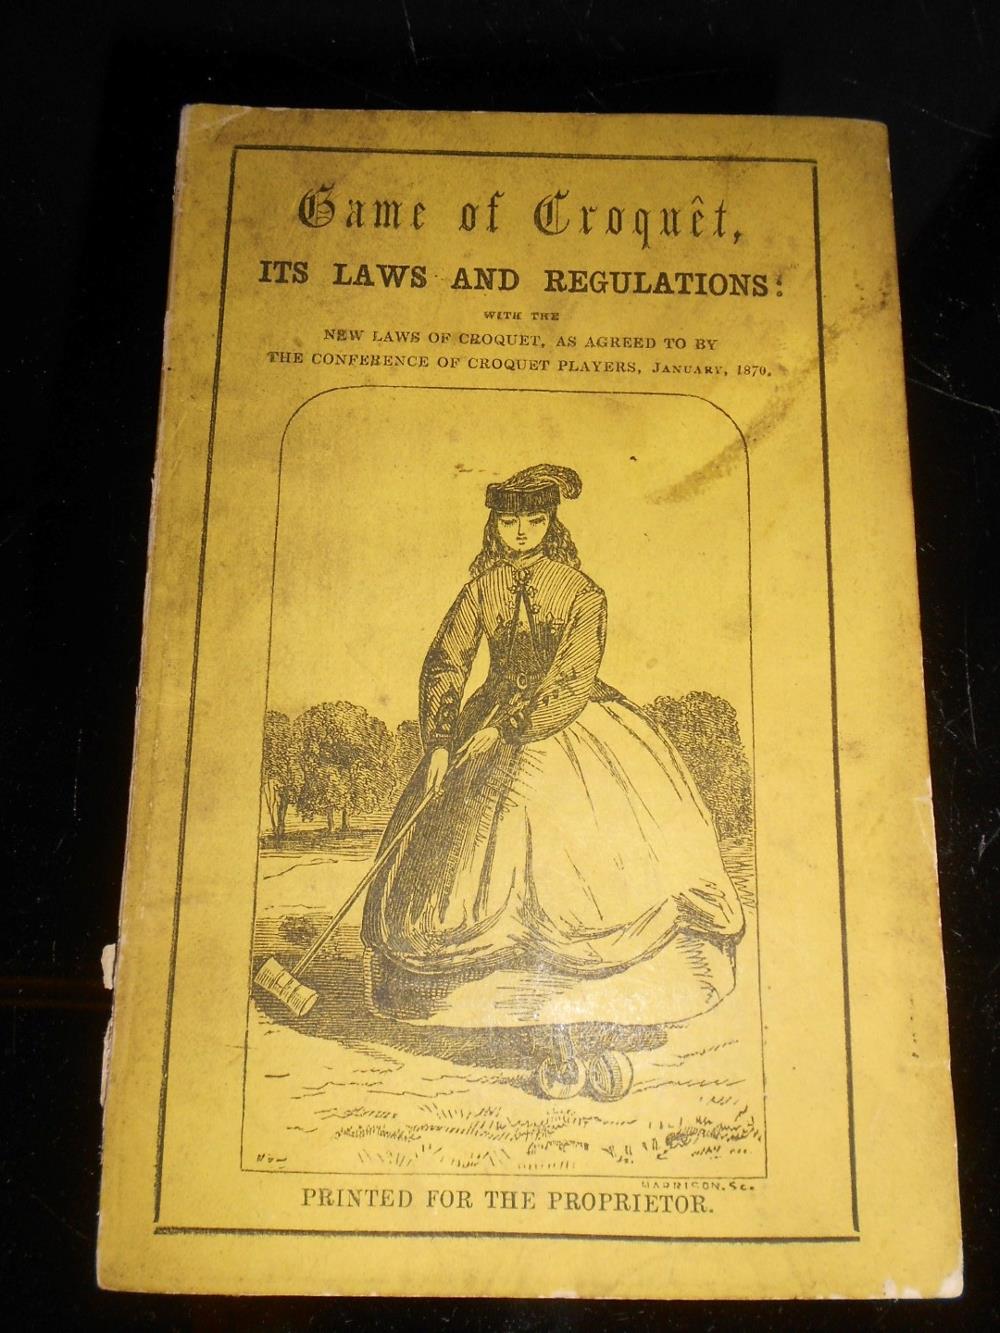 Croquet rules Game of Croquet, its Laws and Regulations, 1870, 12mo, frontispiece of Eglinton Castle